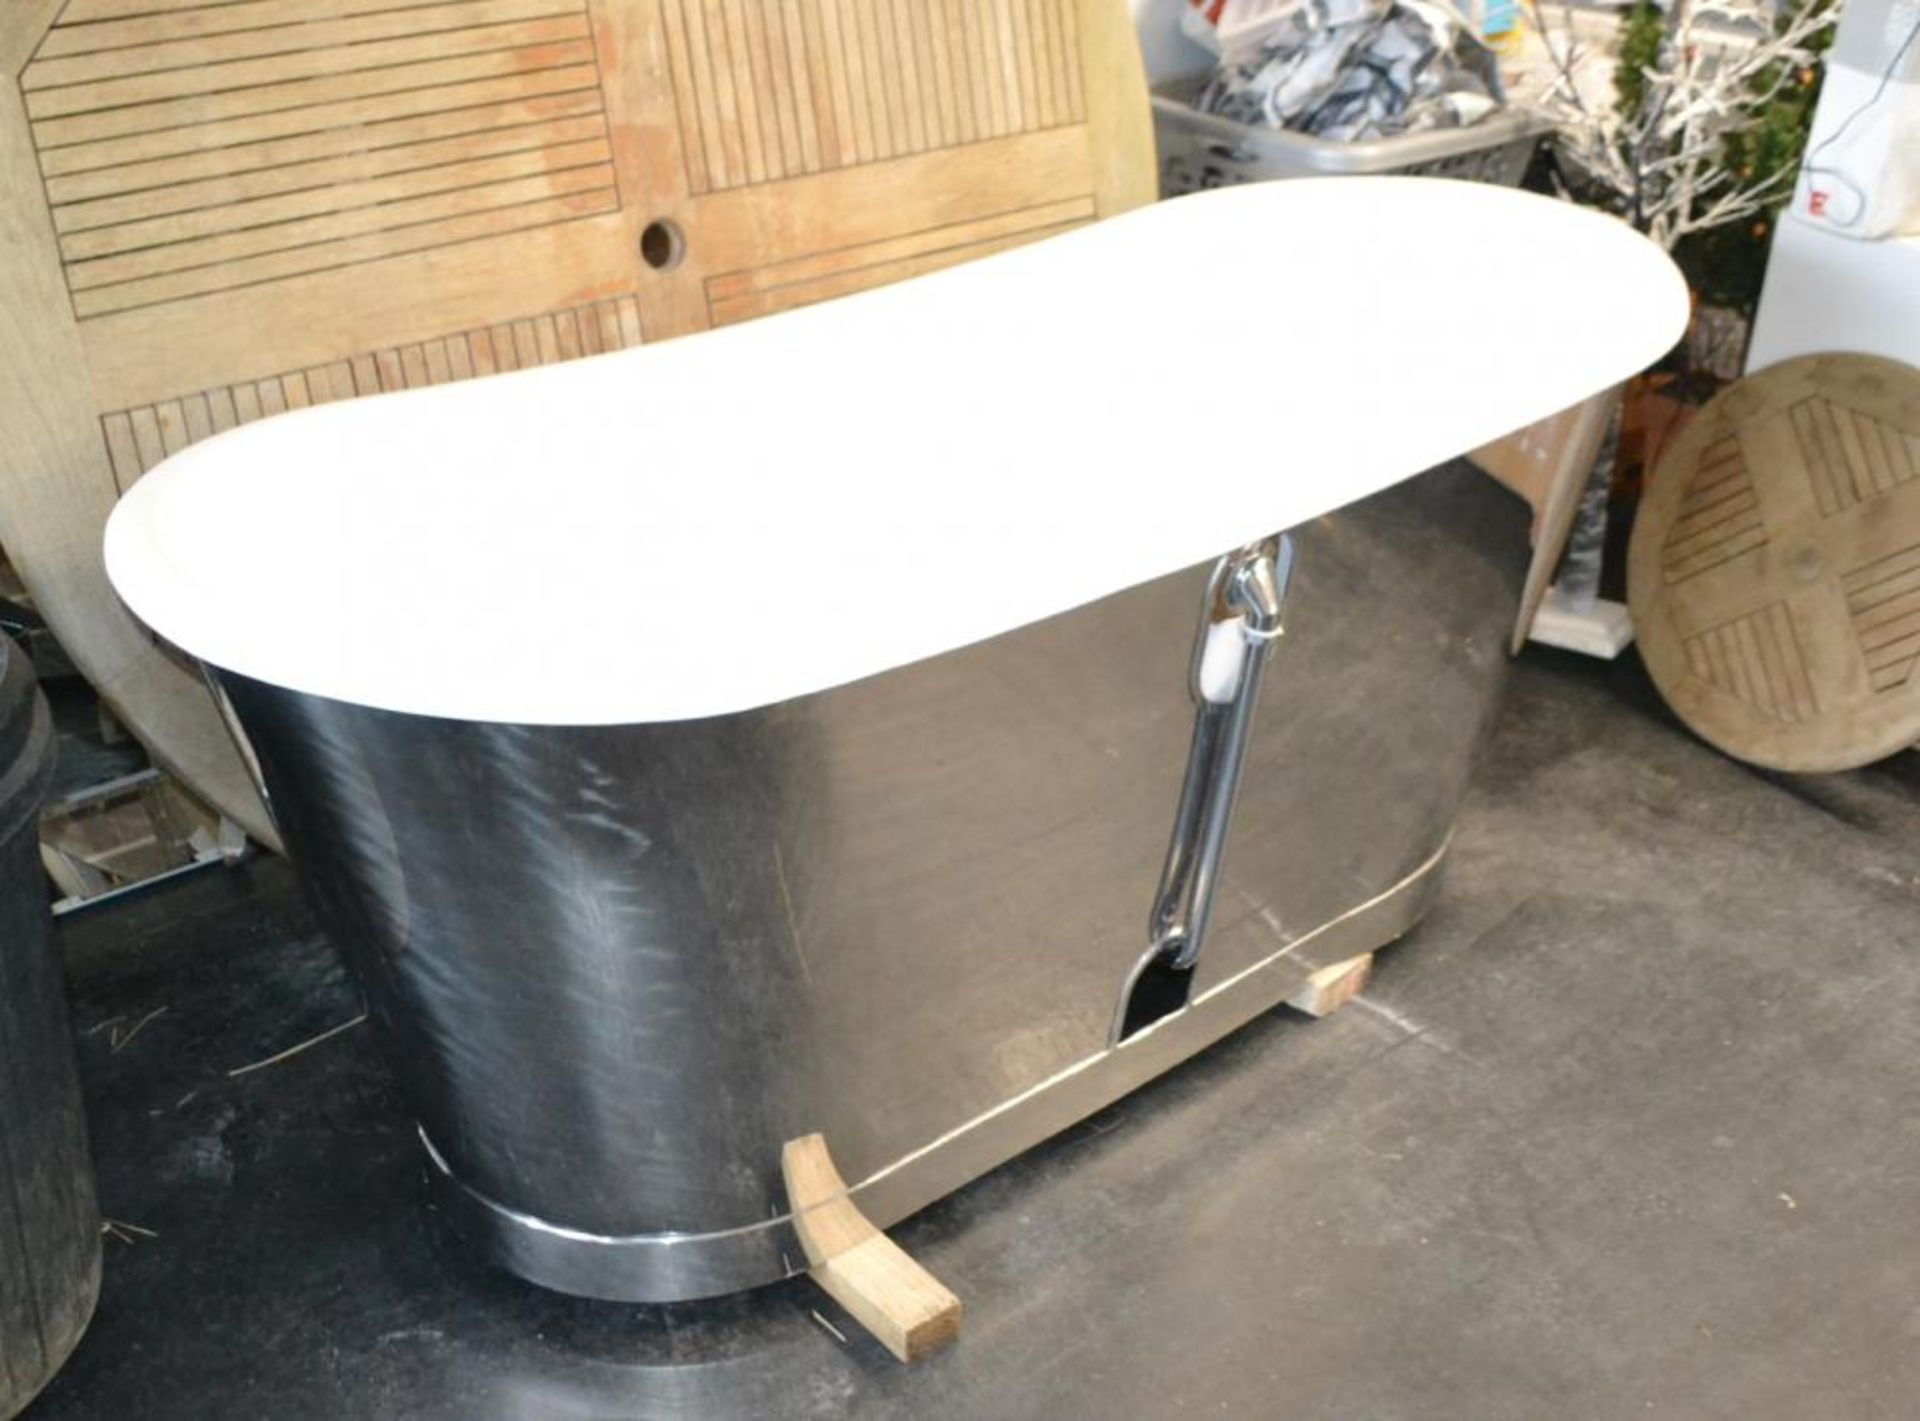 1 x Cast Iron Bath With Stainless Steel Exterior - CL439 - Location: Ilkey LS29 - Used In Good Condi - Image 8 of 8